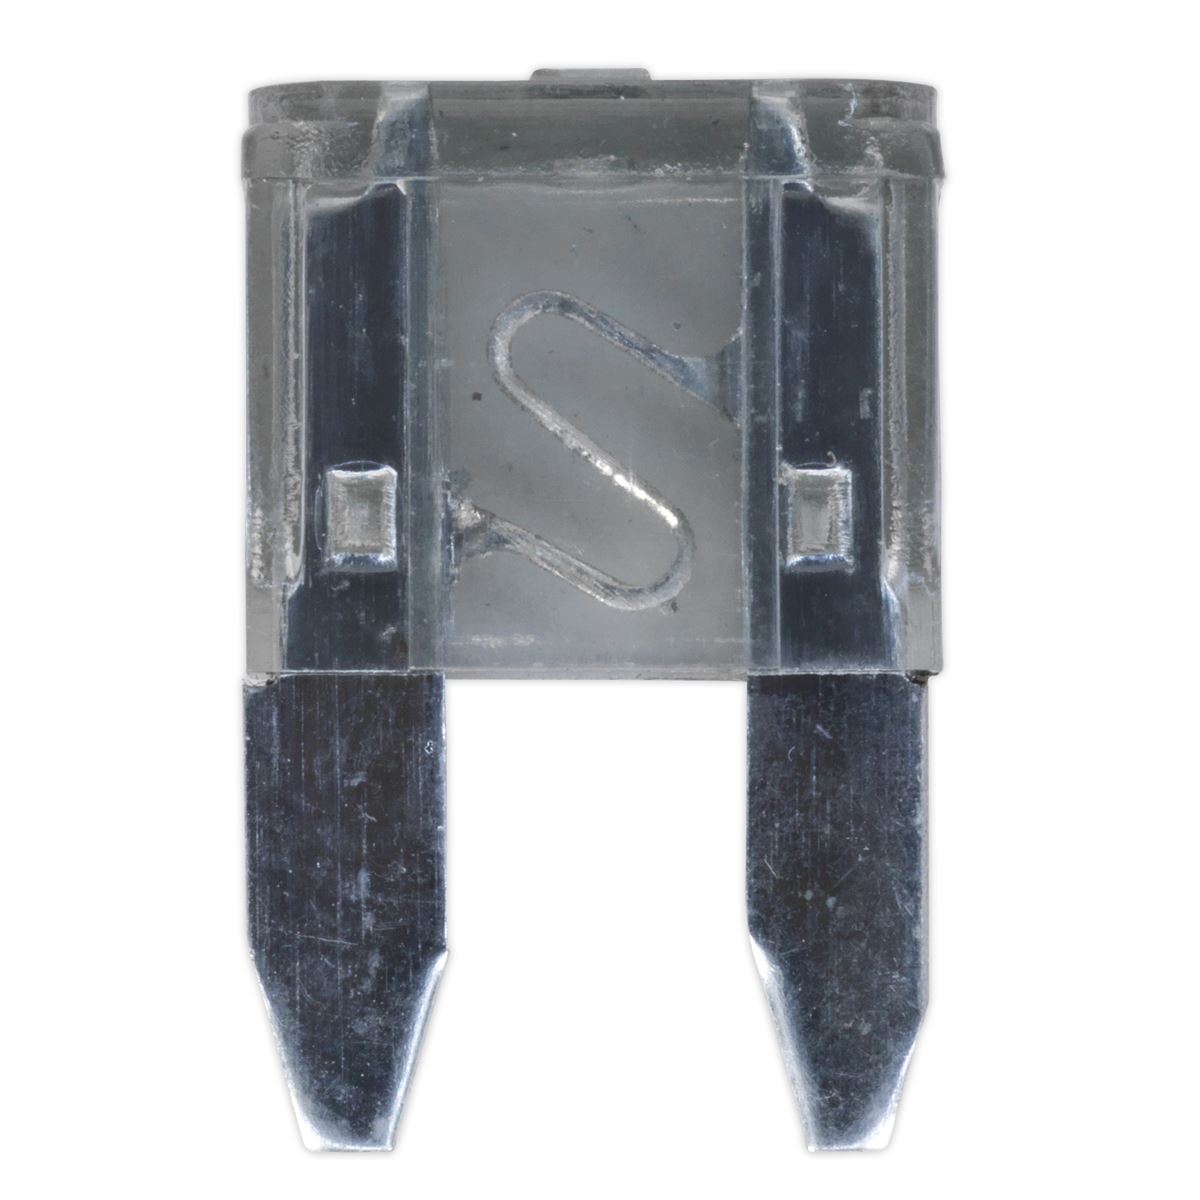 Sealey Automotive MINI Blade Fuse 2A Pack of 50